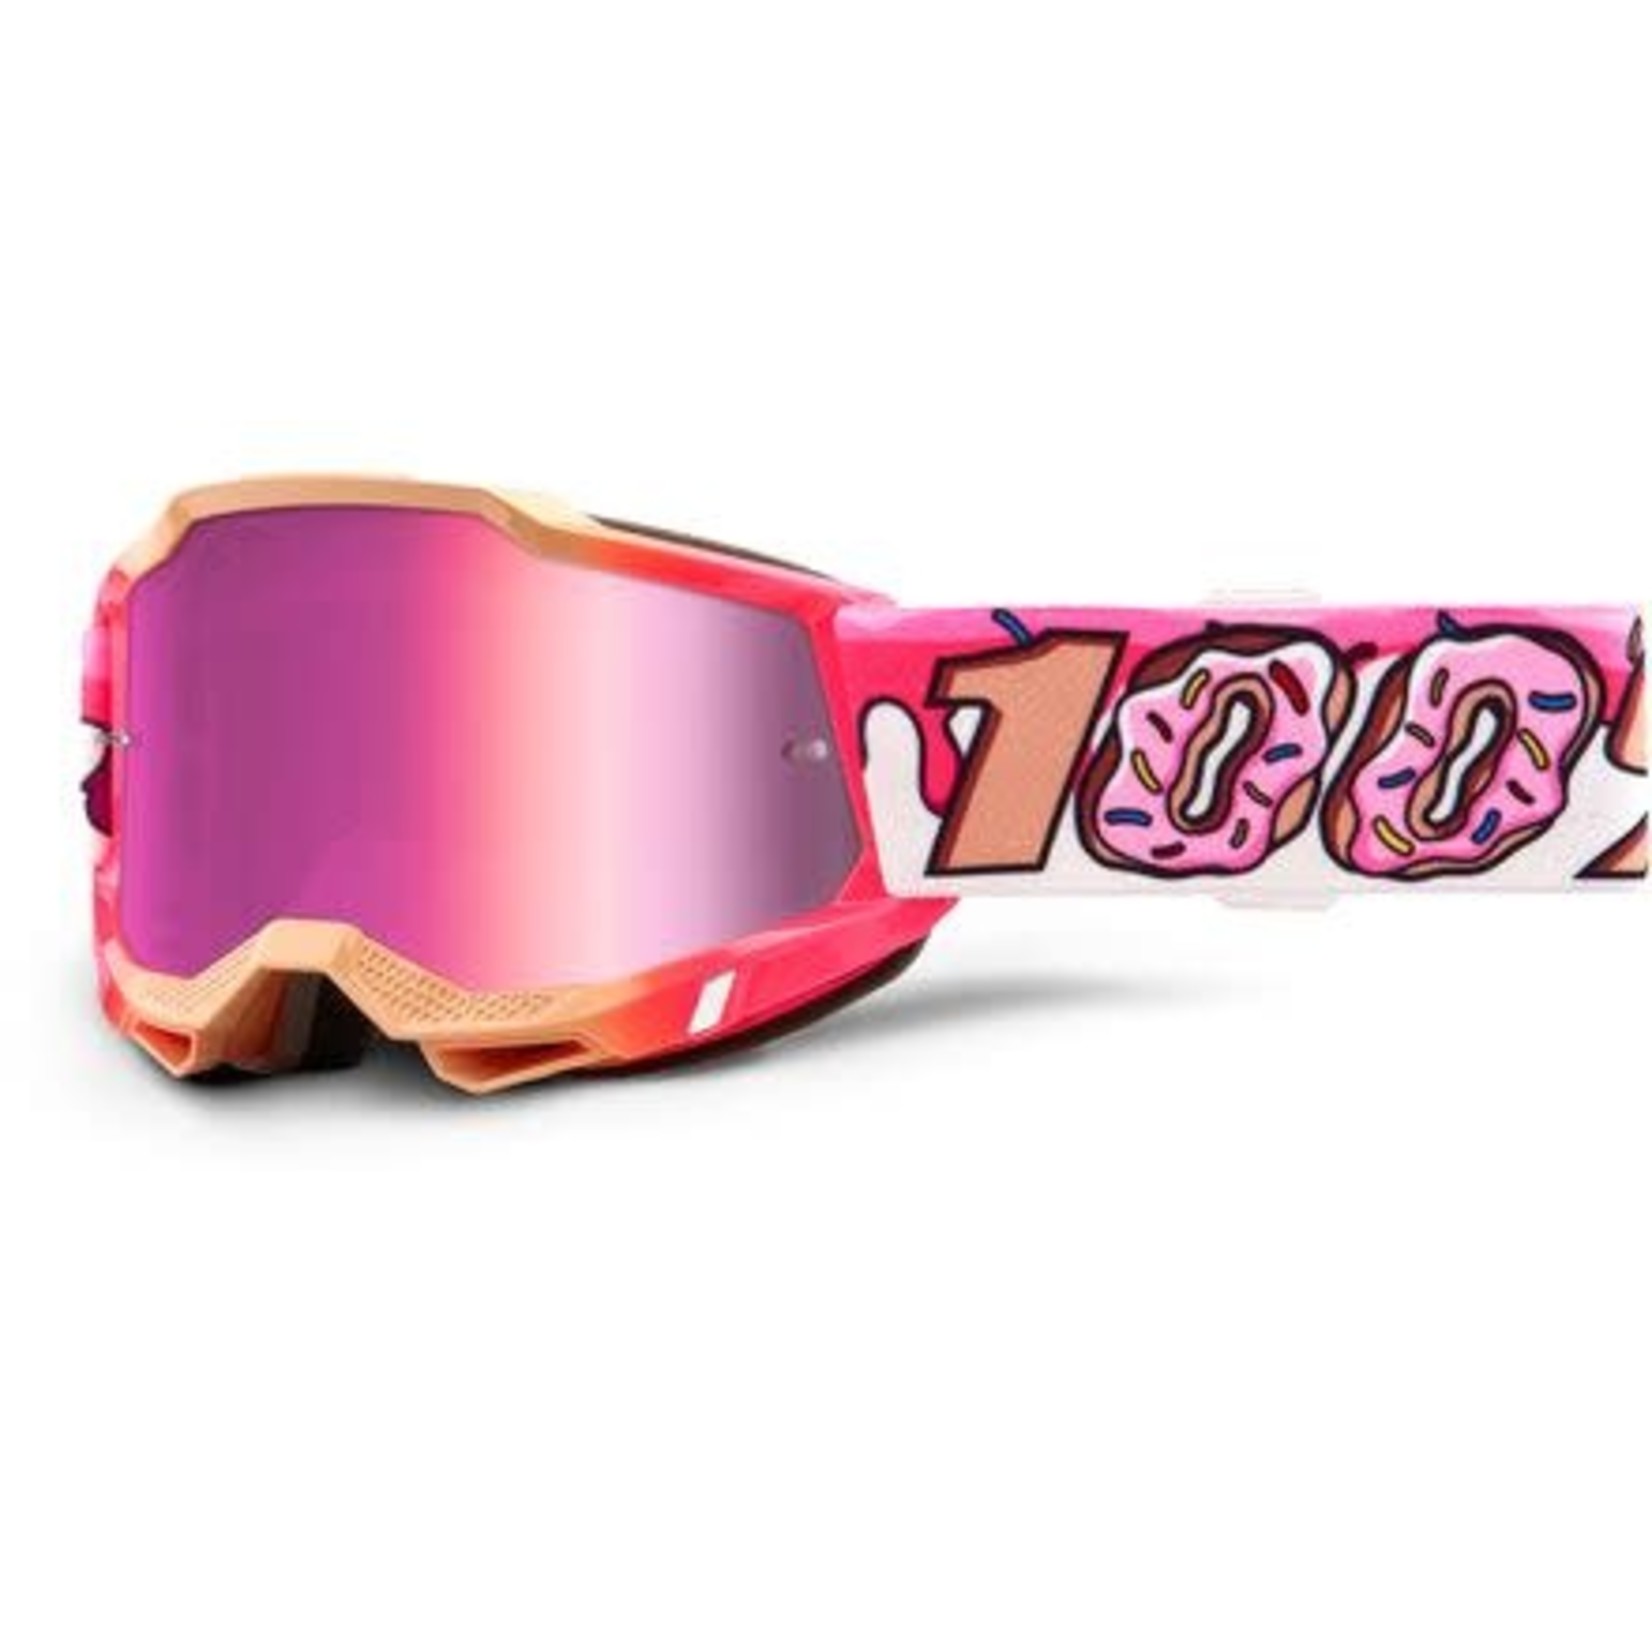 100% Accuri 2 Youth Goggle Donut-Mirror Pink Lens